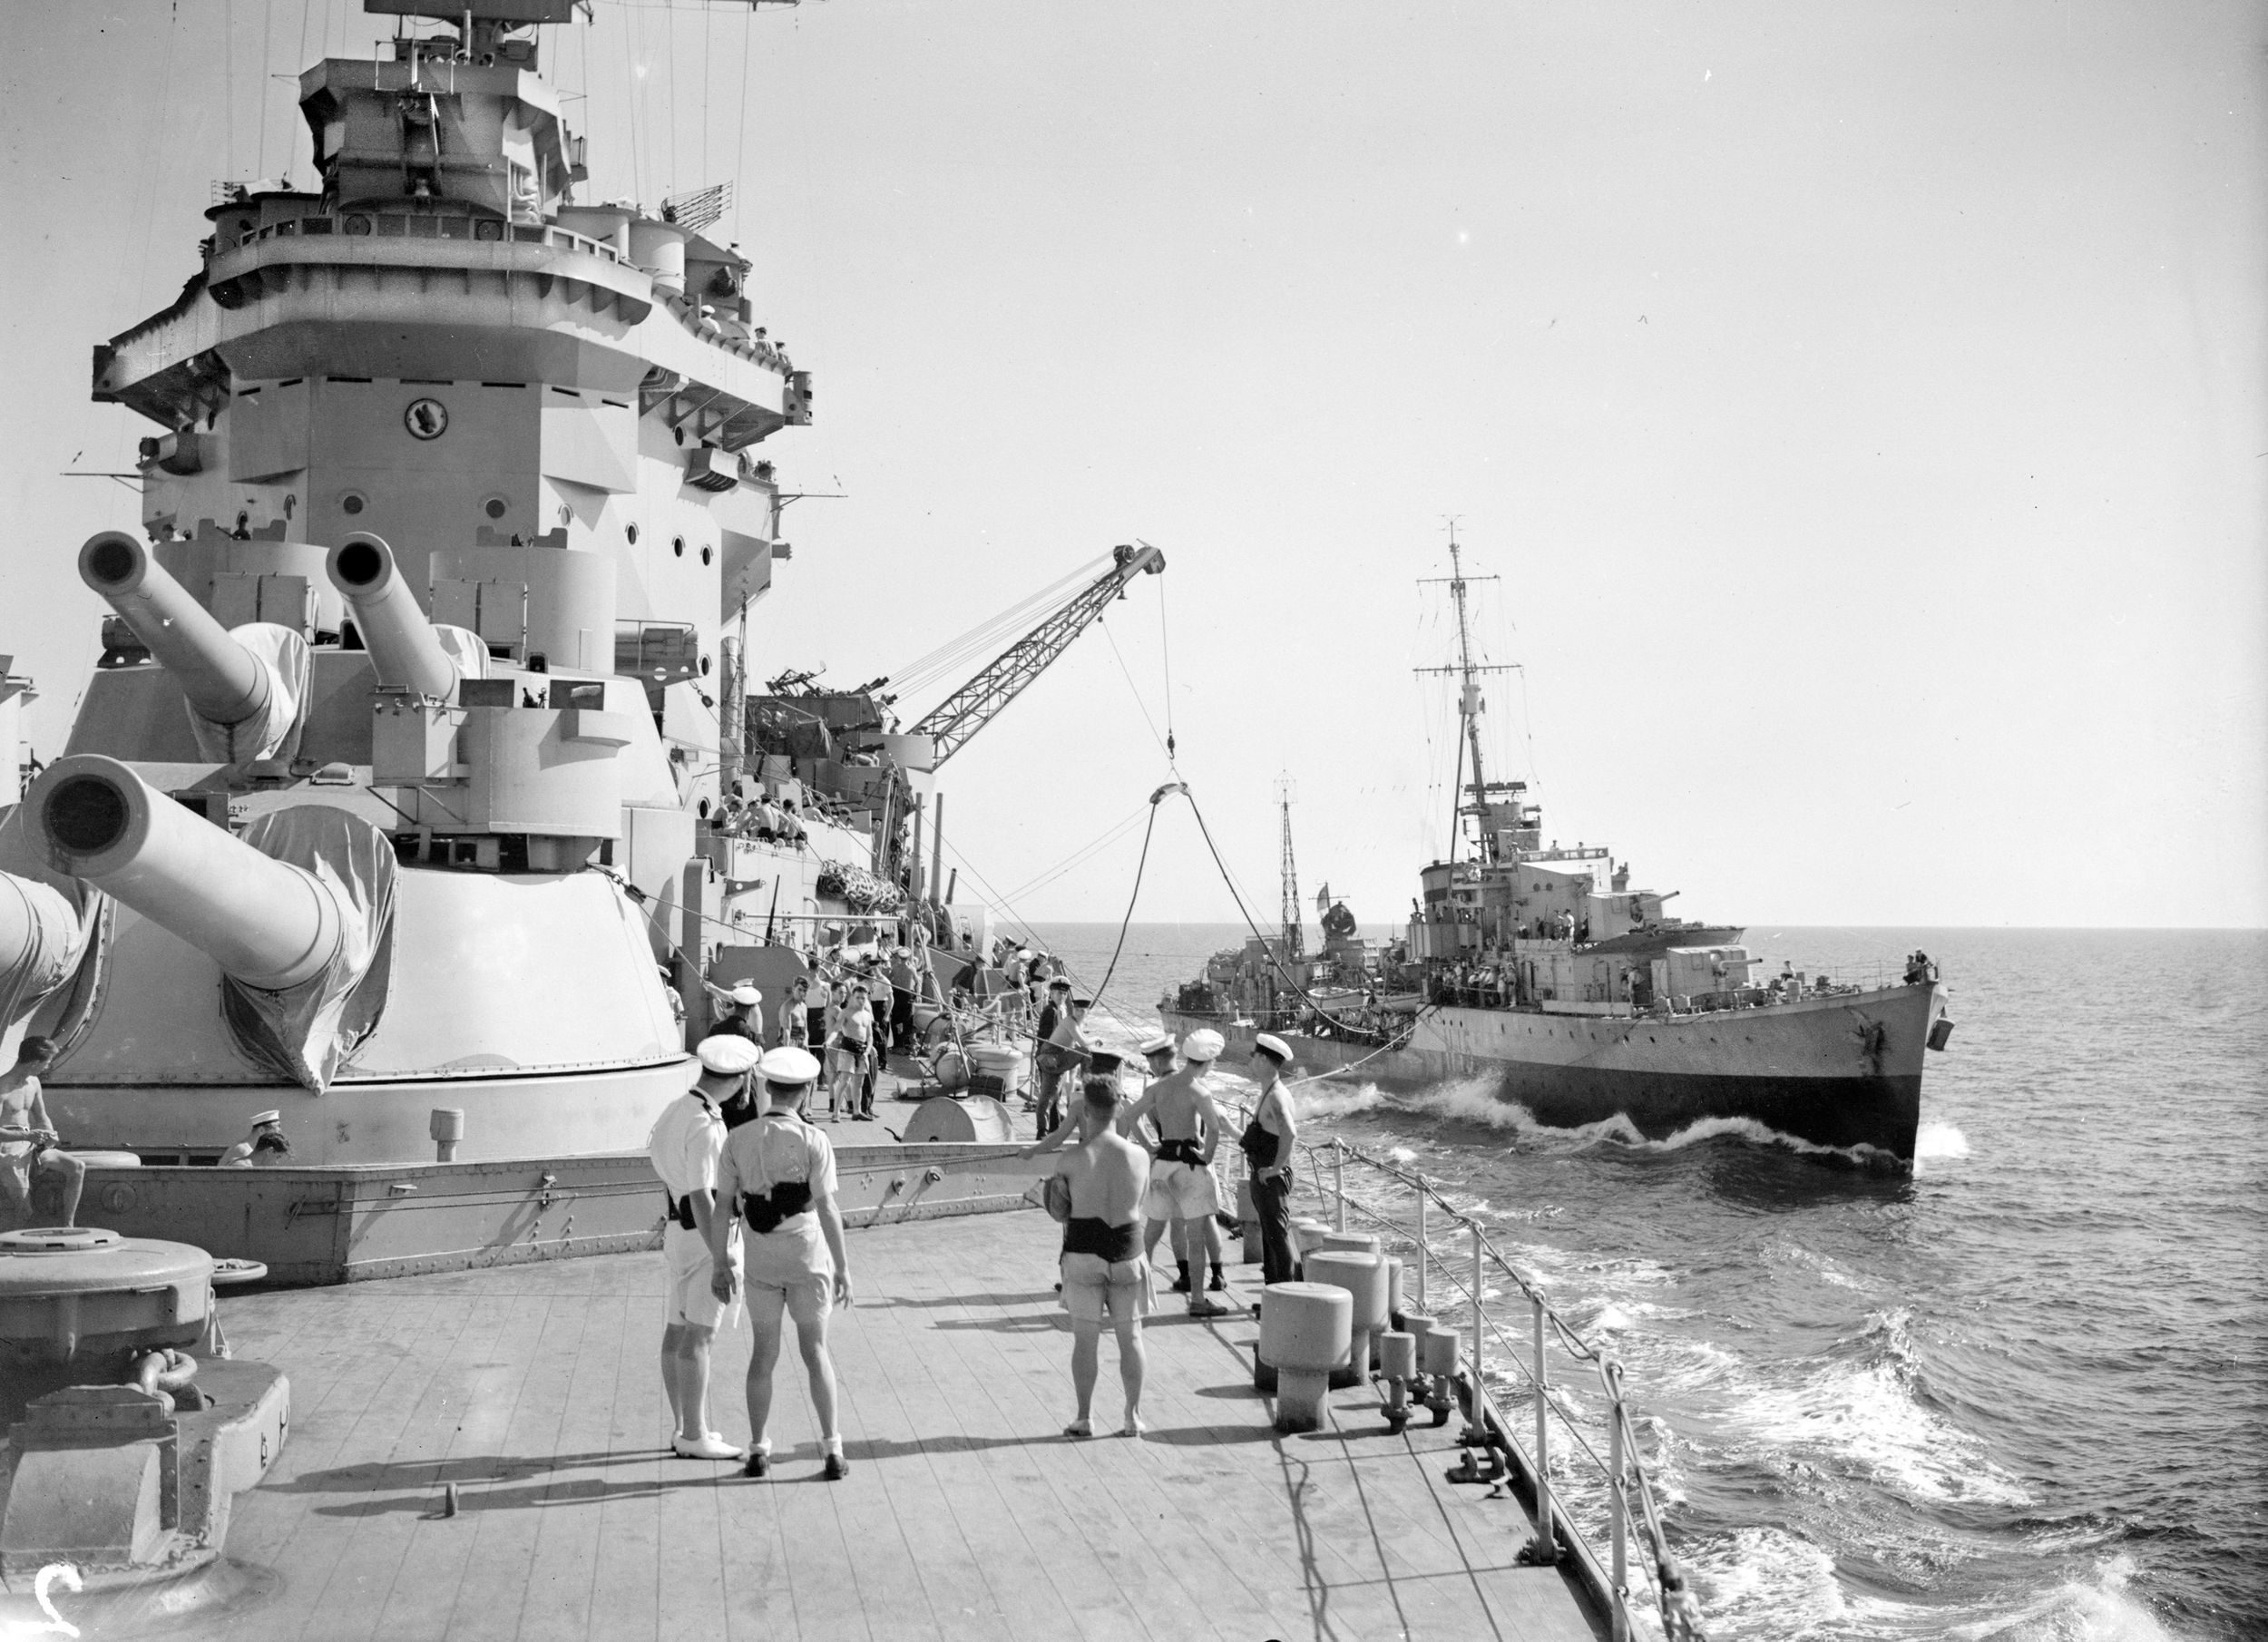 Armament on display: HMS Warspite, with her 15-inch guns in the forward position, sails from Gibralter through the Mediterranean enroute to take part in support of Operation Husky, the Allied invasion of Sicily, July 1943. By the time she was decommissioned, Warspite had earned the most battle honors ever awarded to an individual ship in the Royal Navy and the most awarded for actions during World War II.